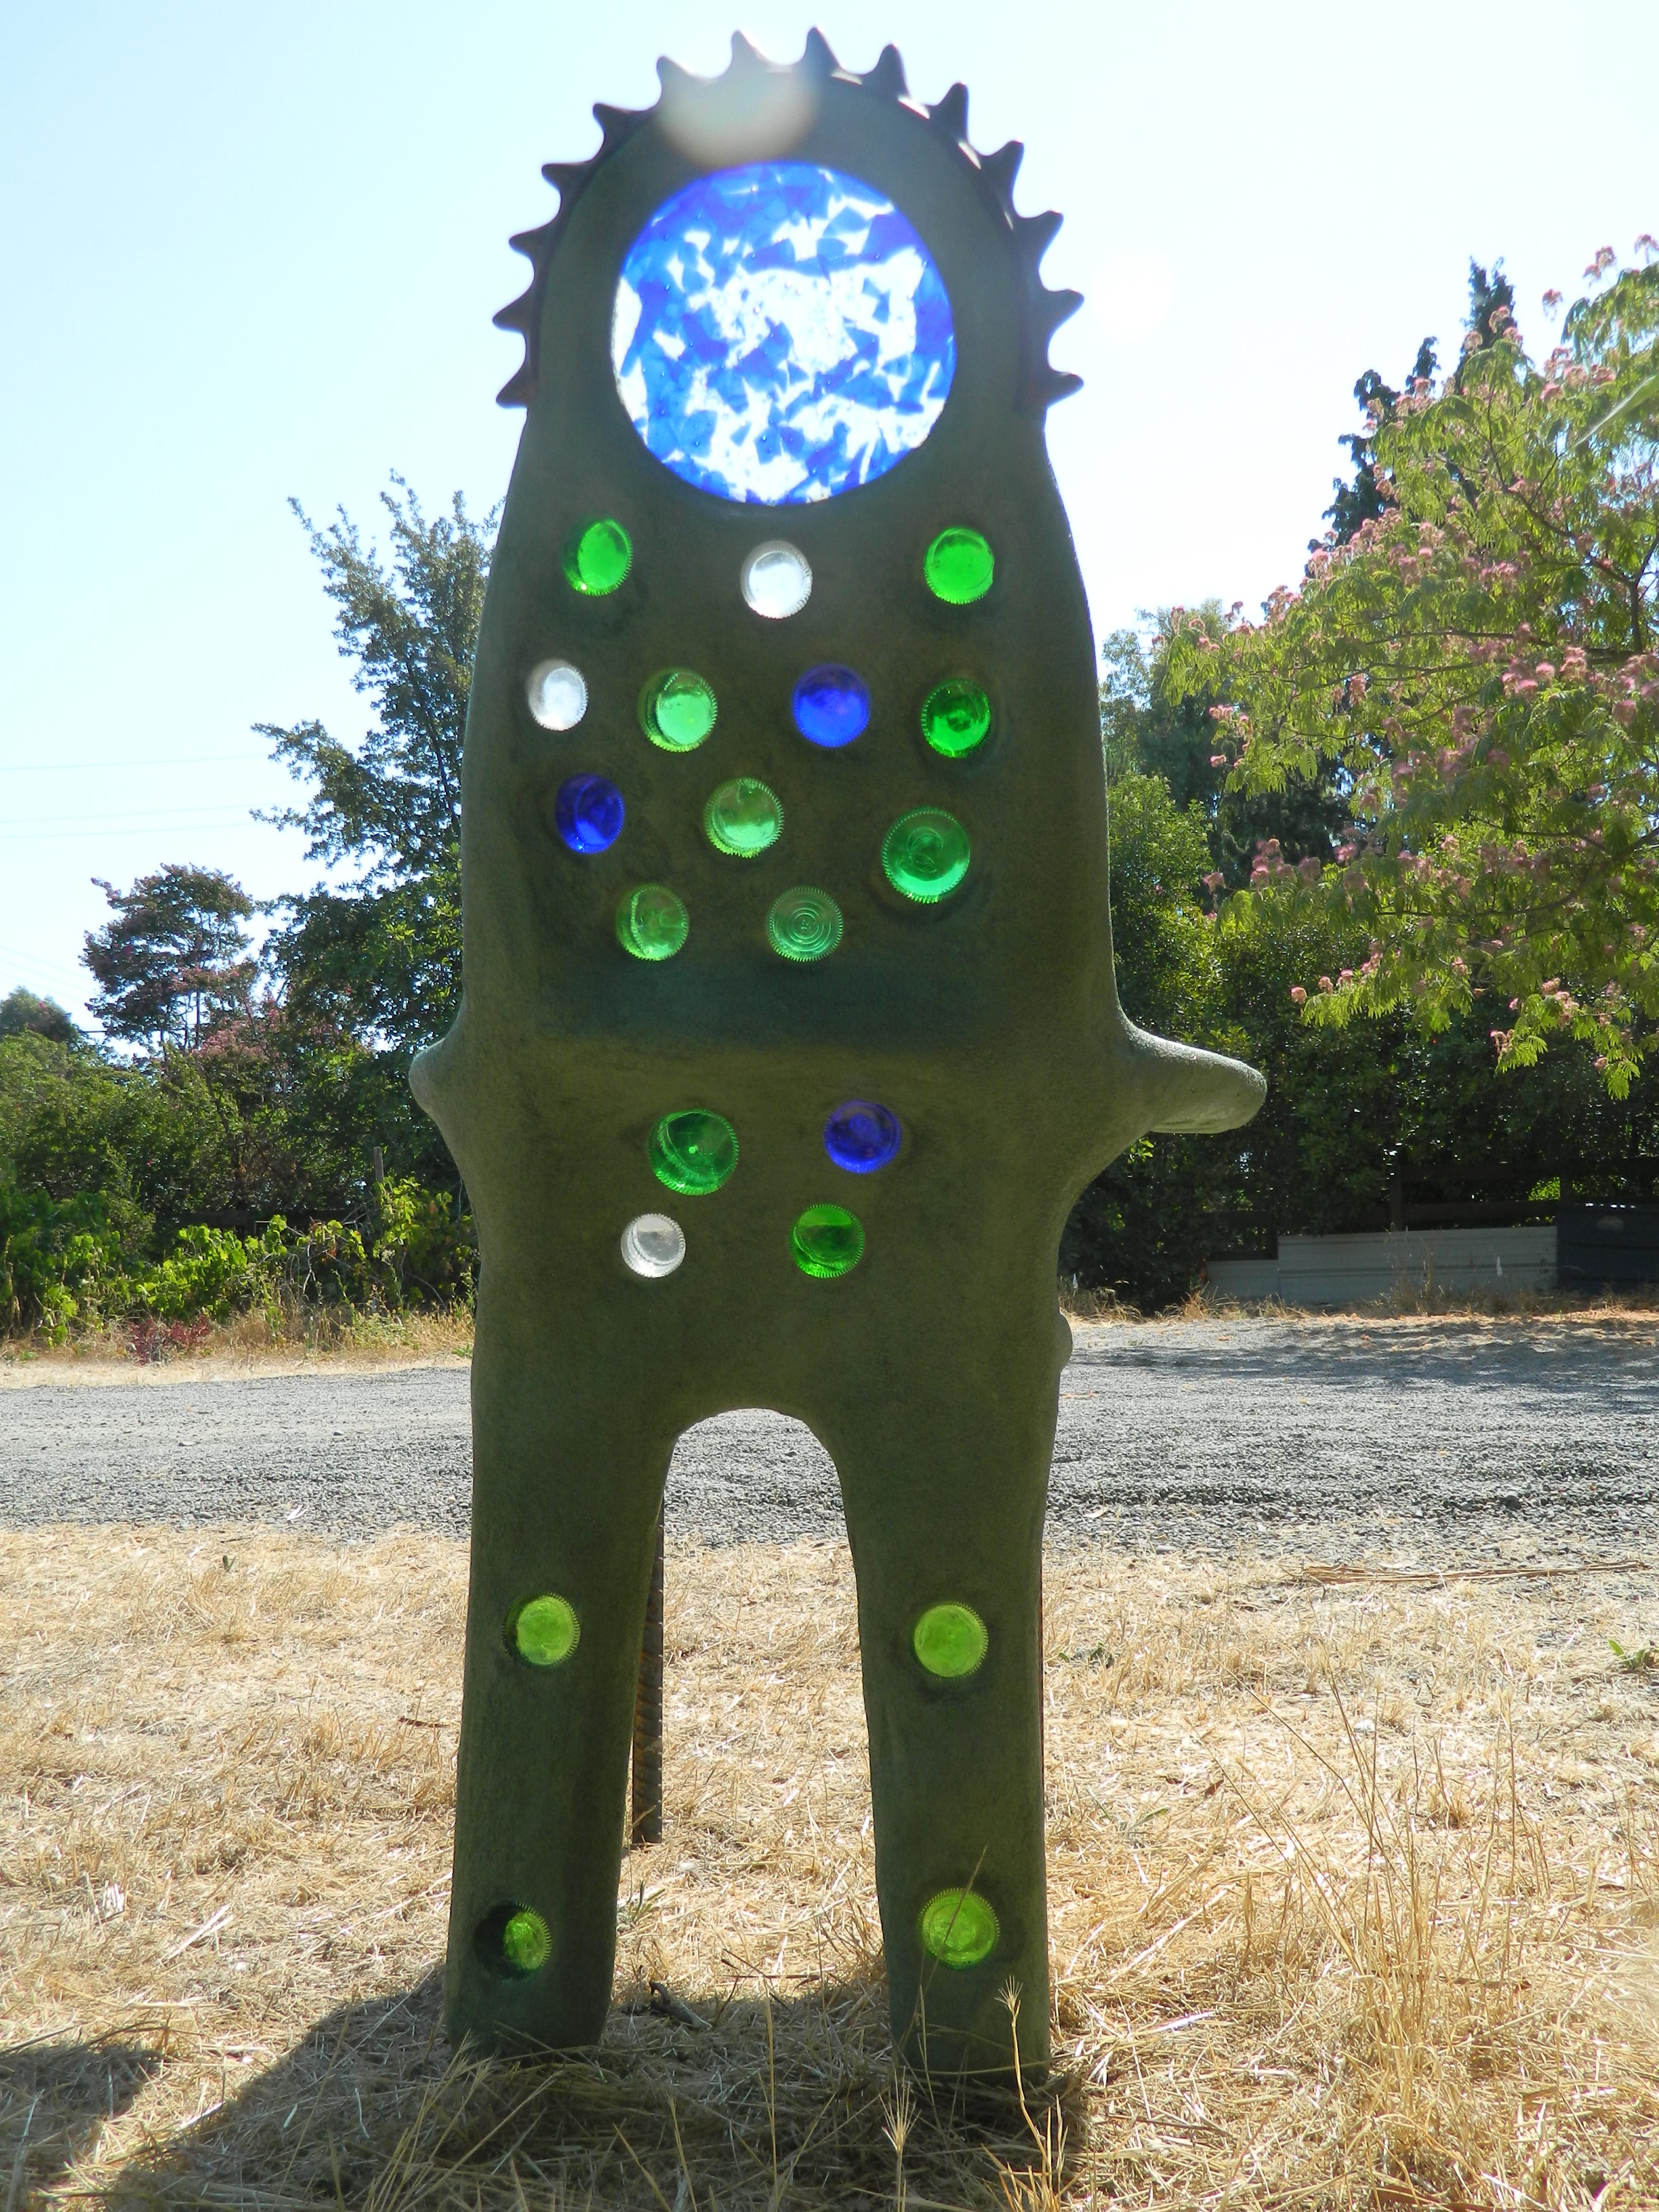  “Cactus Chair” (reverse view) 